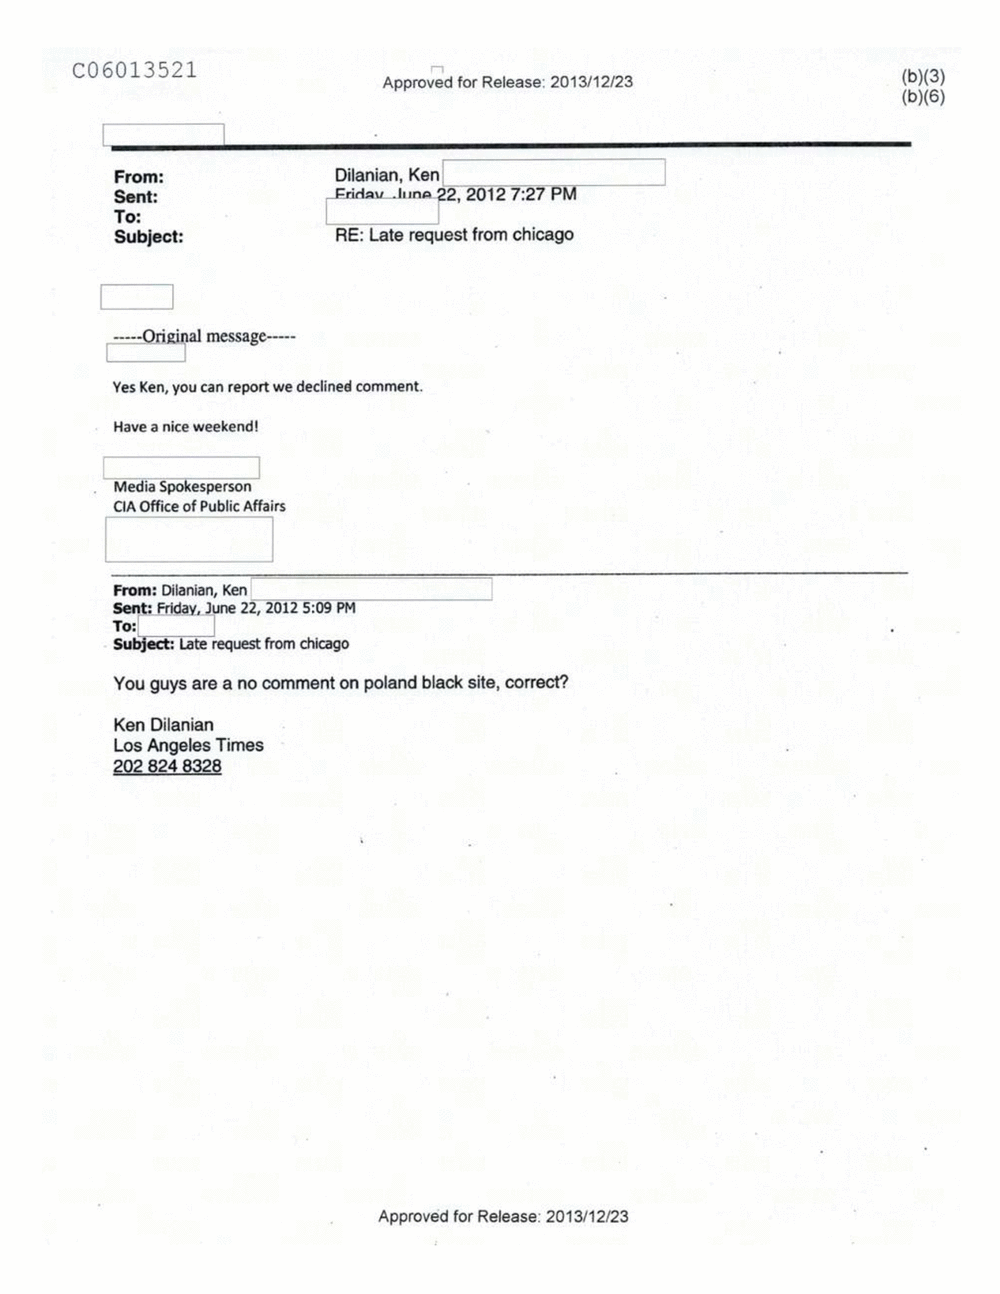 Page 359 from Email Correspondence Between Reporters and CIA Flacks